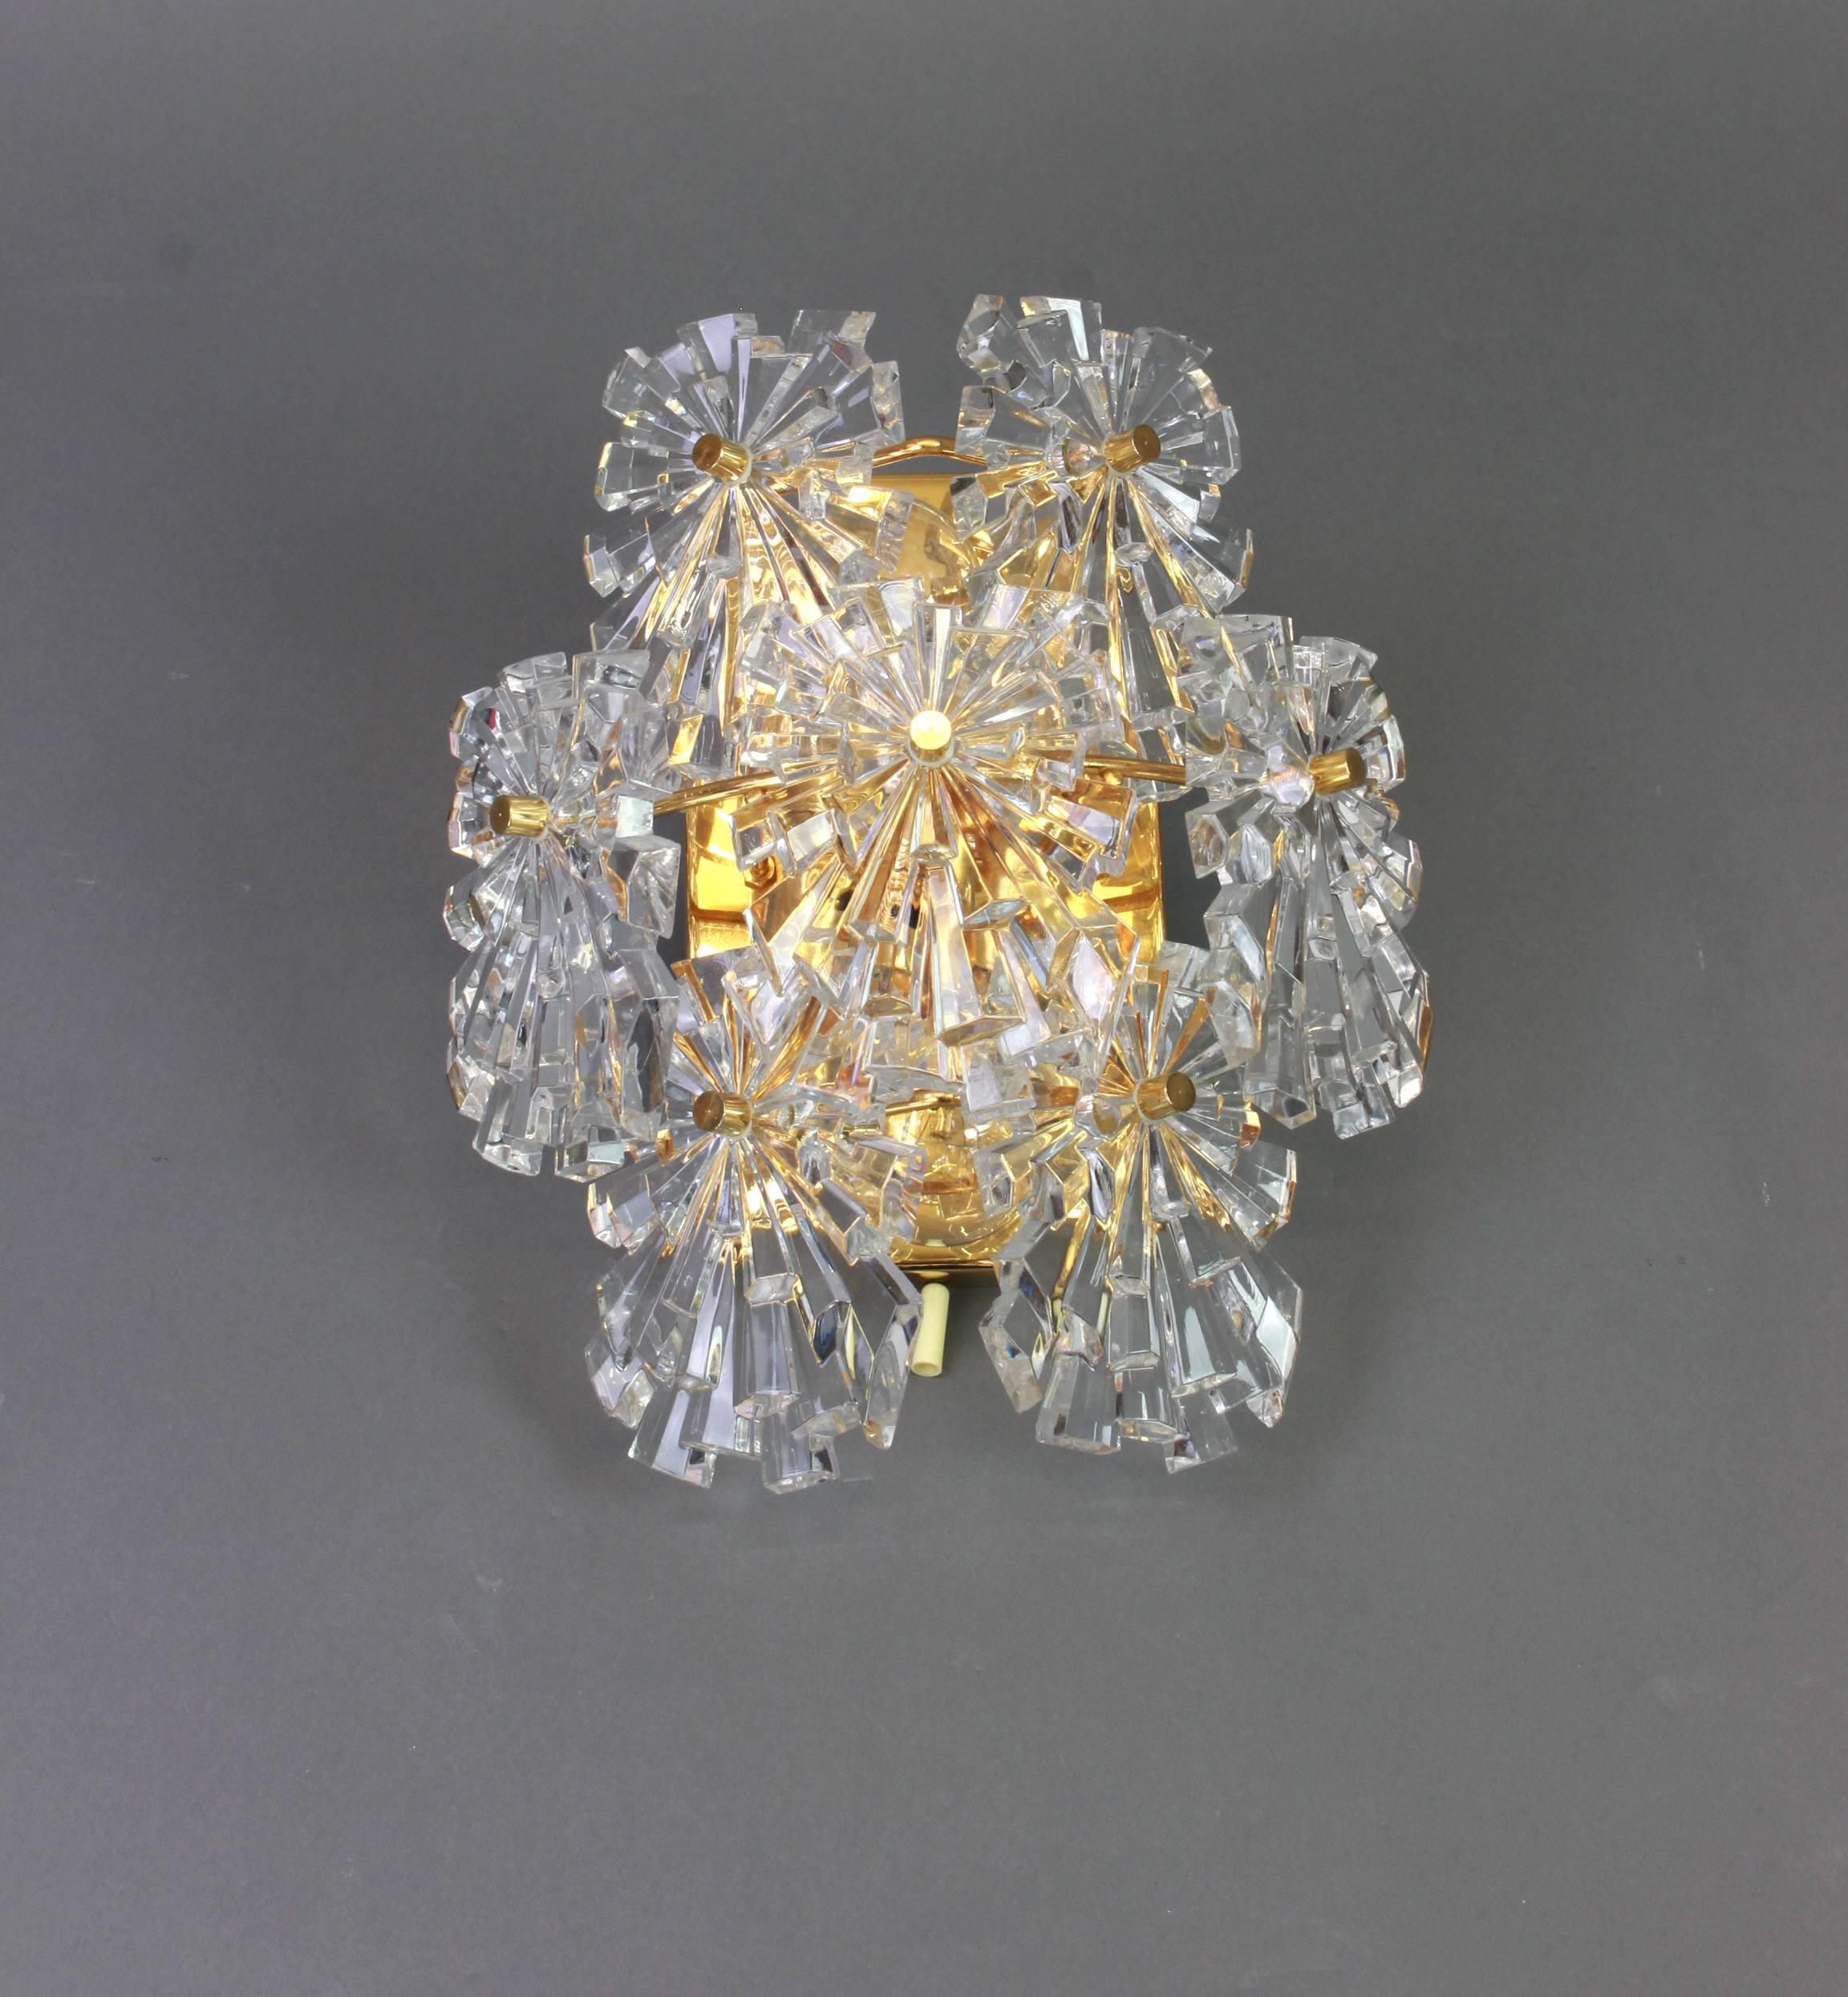 A stunning pair of golden sconces with crystal glasses, made by Kinkeldey, Germany, circa 1970-1979. It’s composed of Murano tear drop crystal glass pieces on gilded brass frame.

Best of the 1970s from Germany.

High quality and in very good